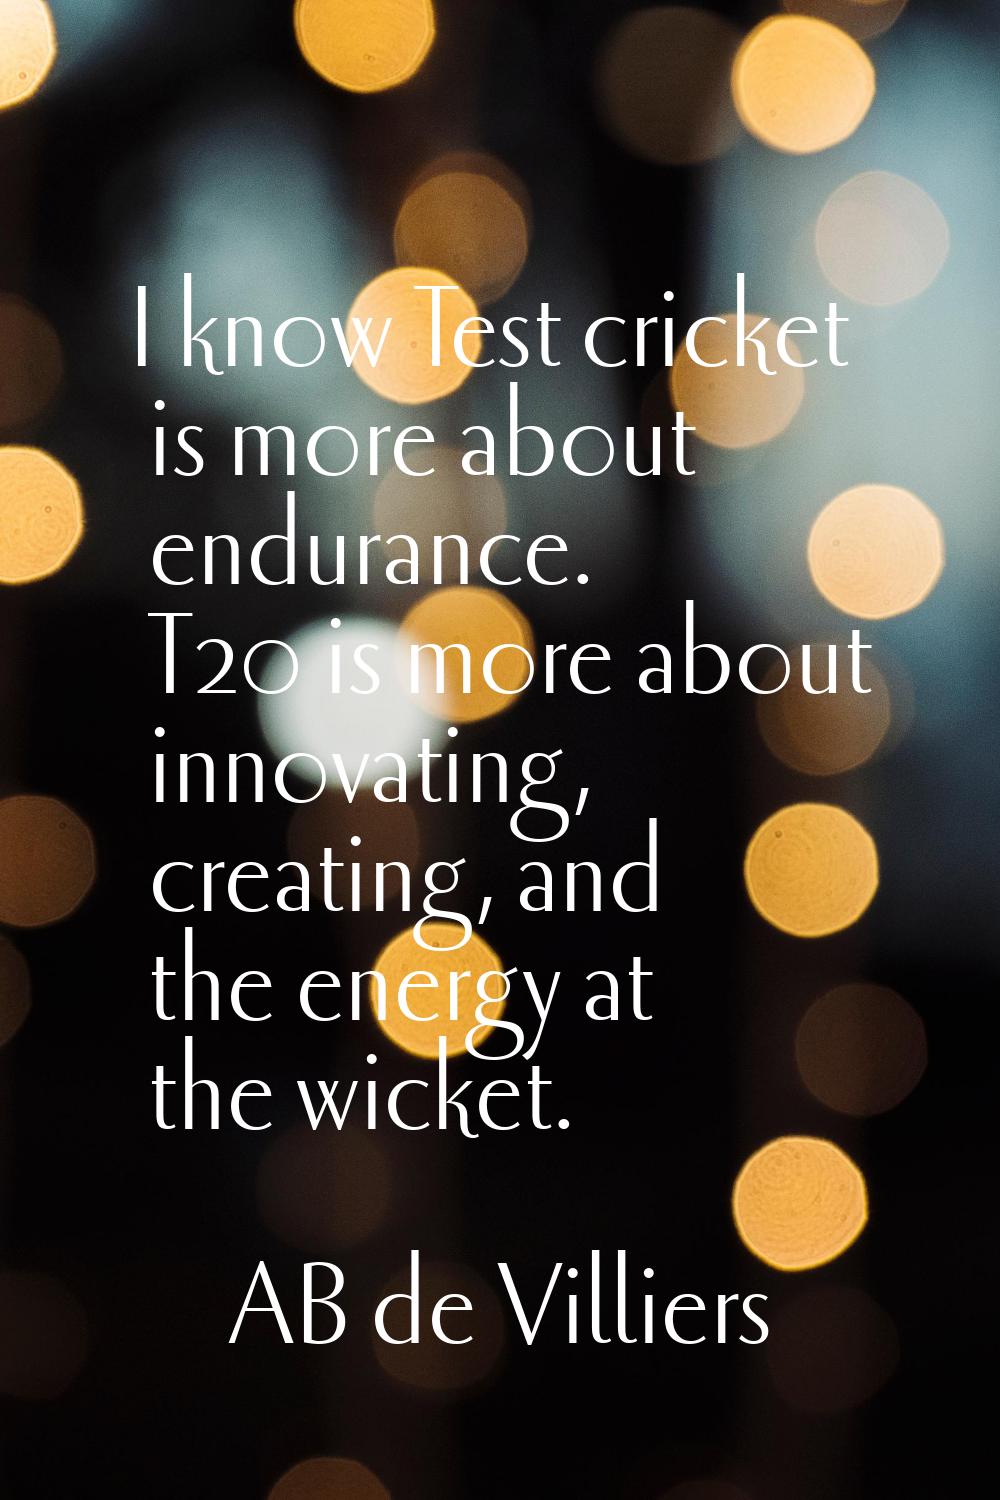 I know Test cricket is more about endurance. T20 is more about innovating, creating, and the energy